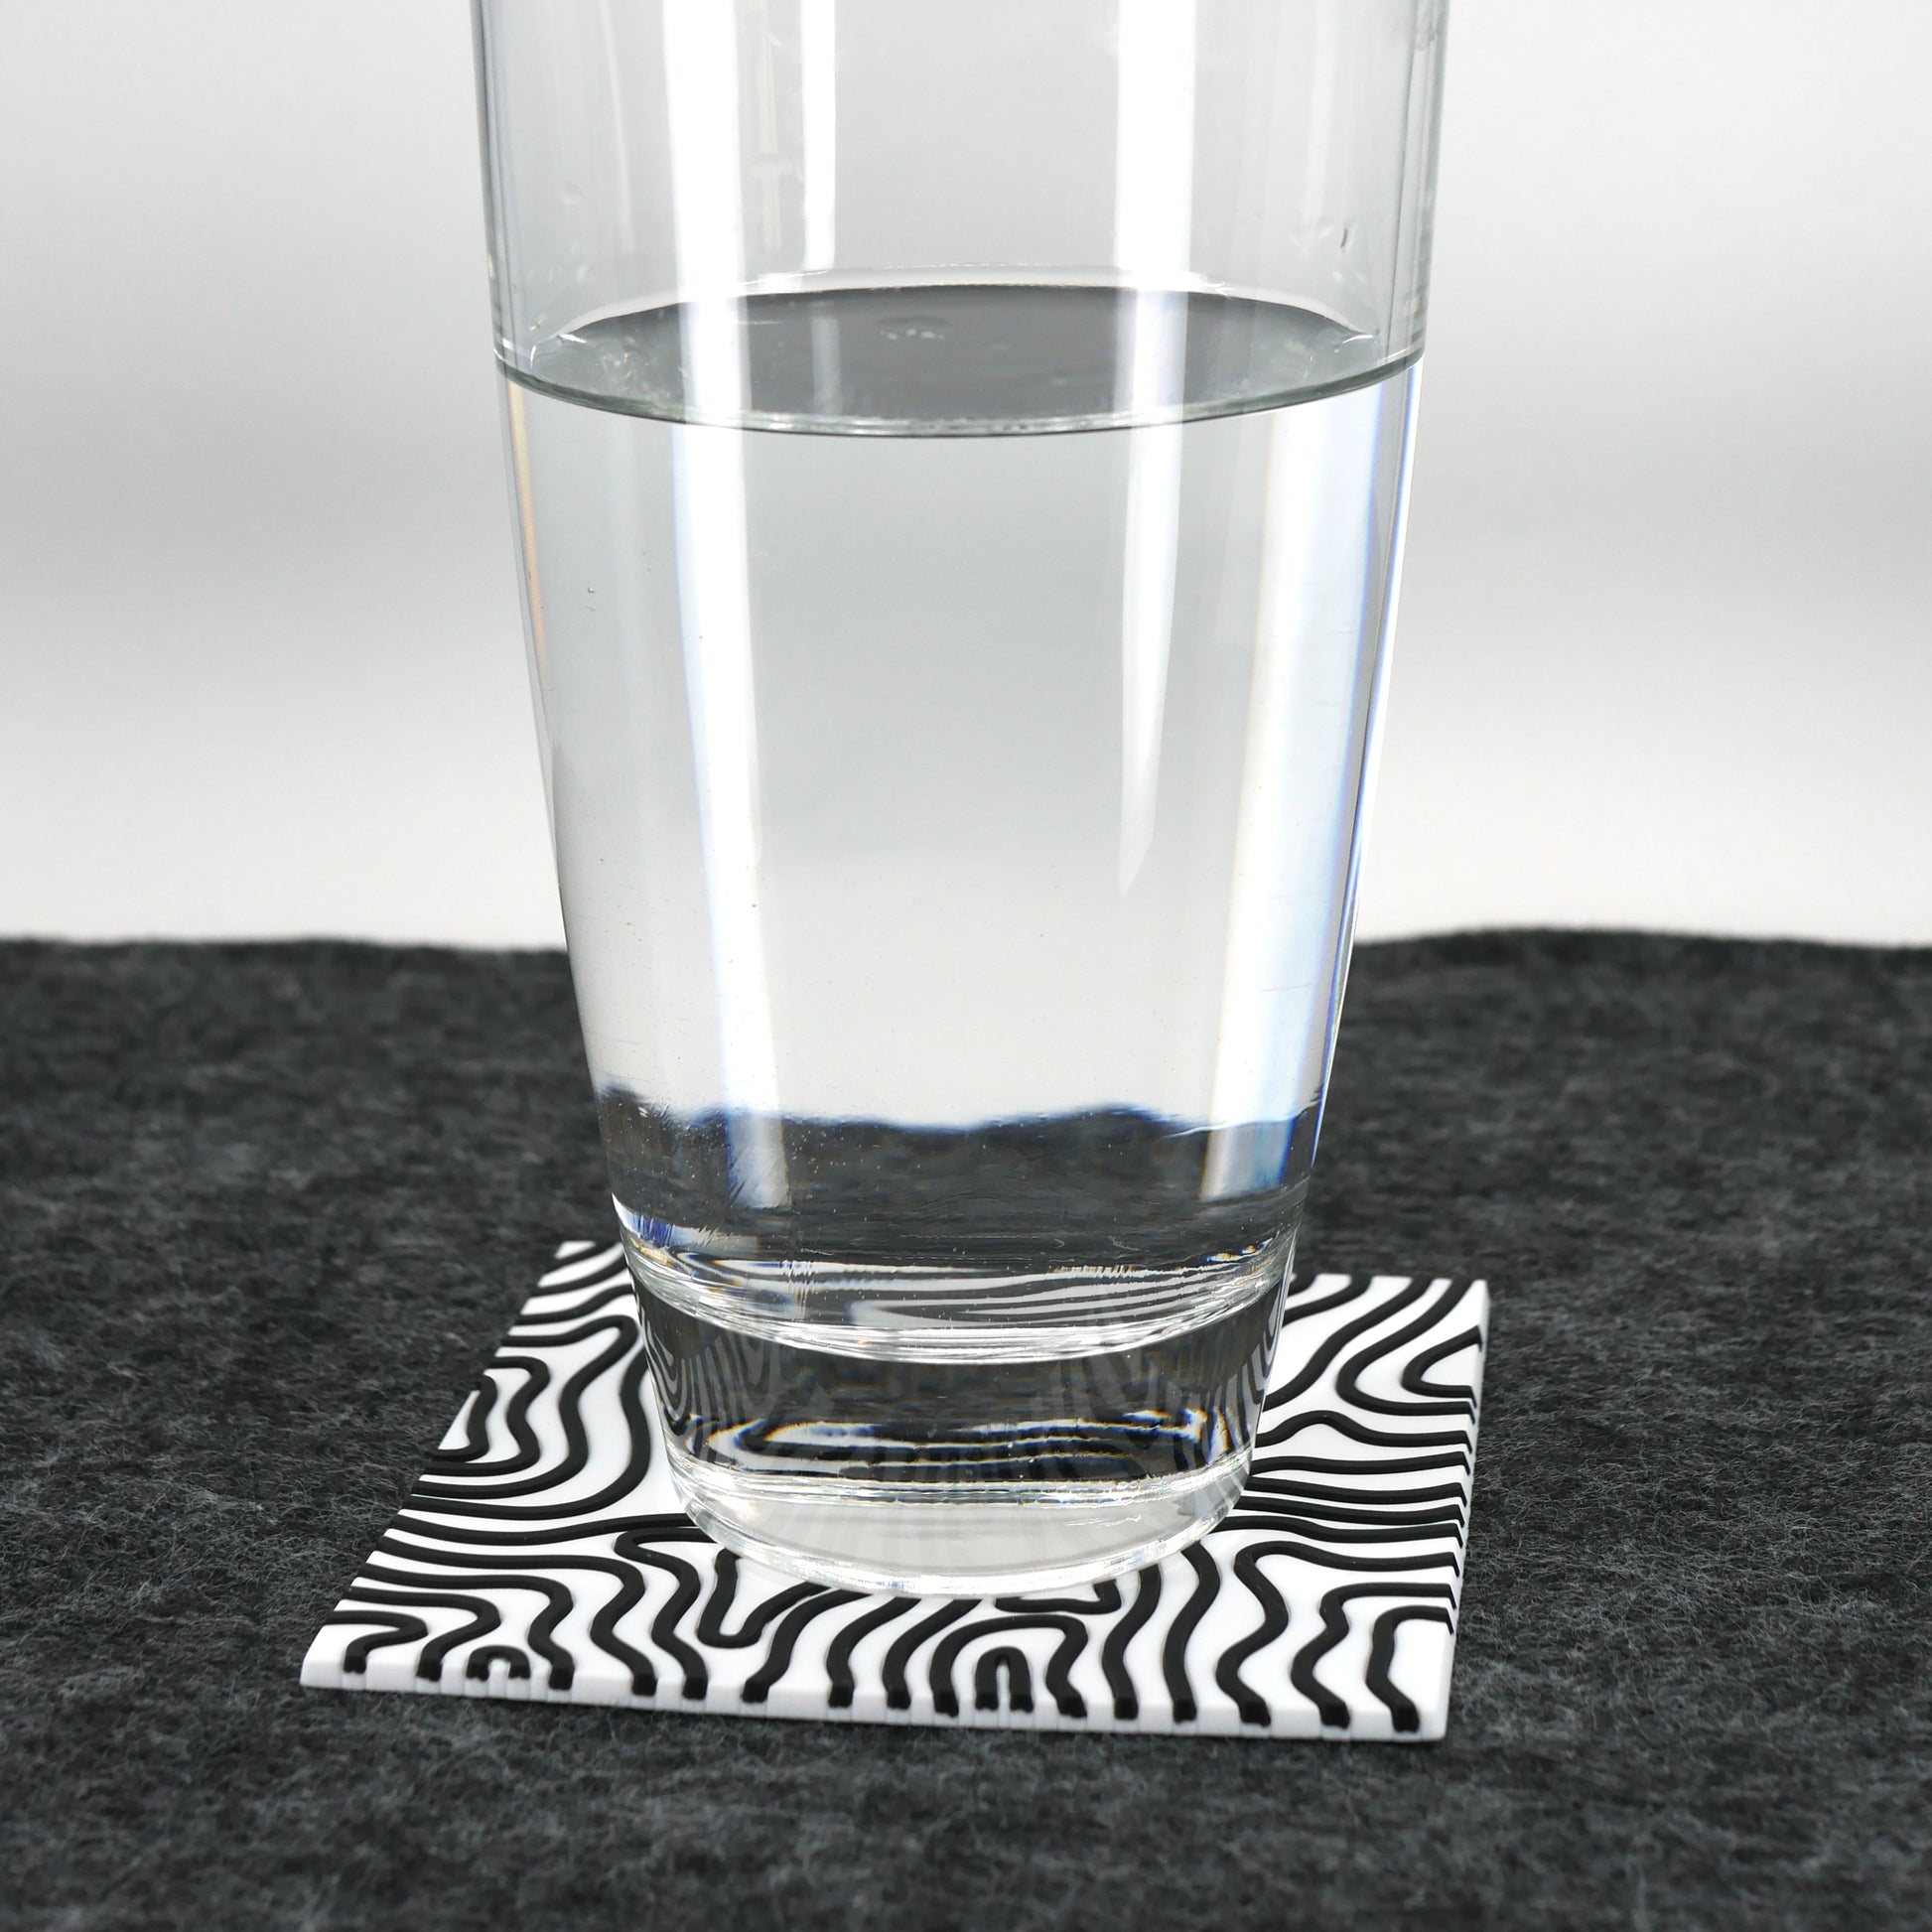 A square white topographic PVC rubber coaster sitting on a gray desk mat. A glass of water sits on the coaster.